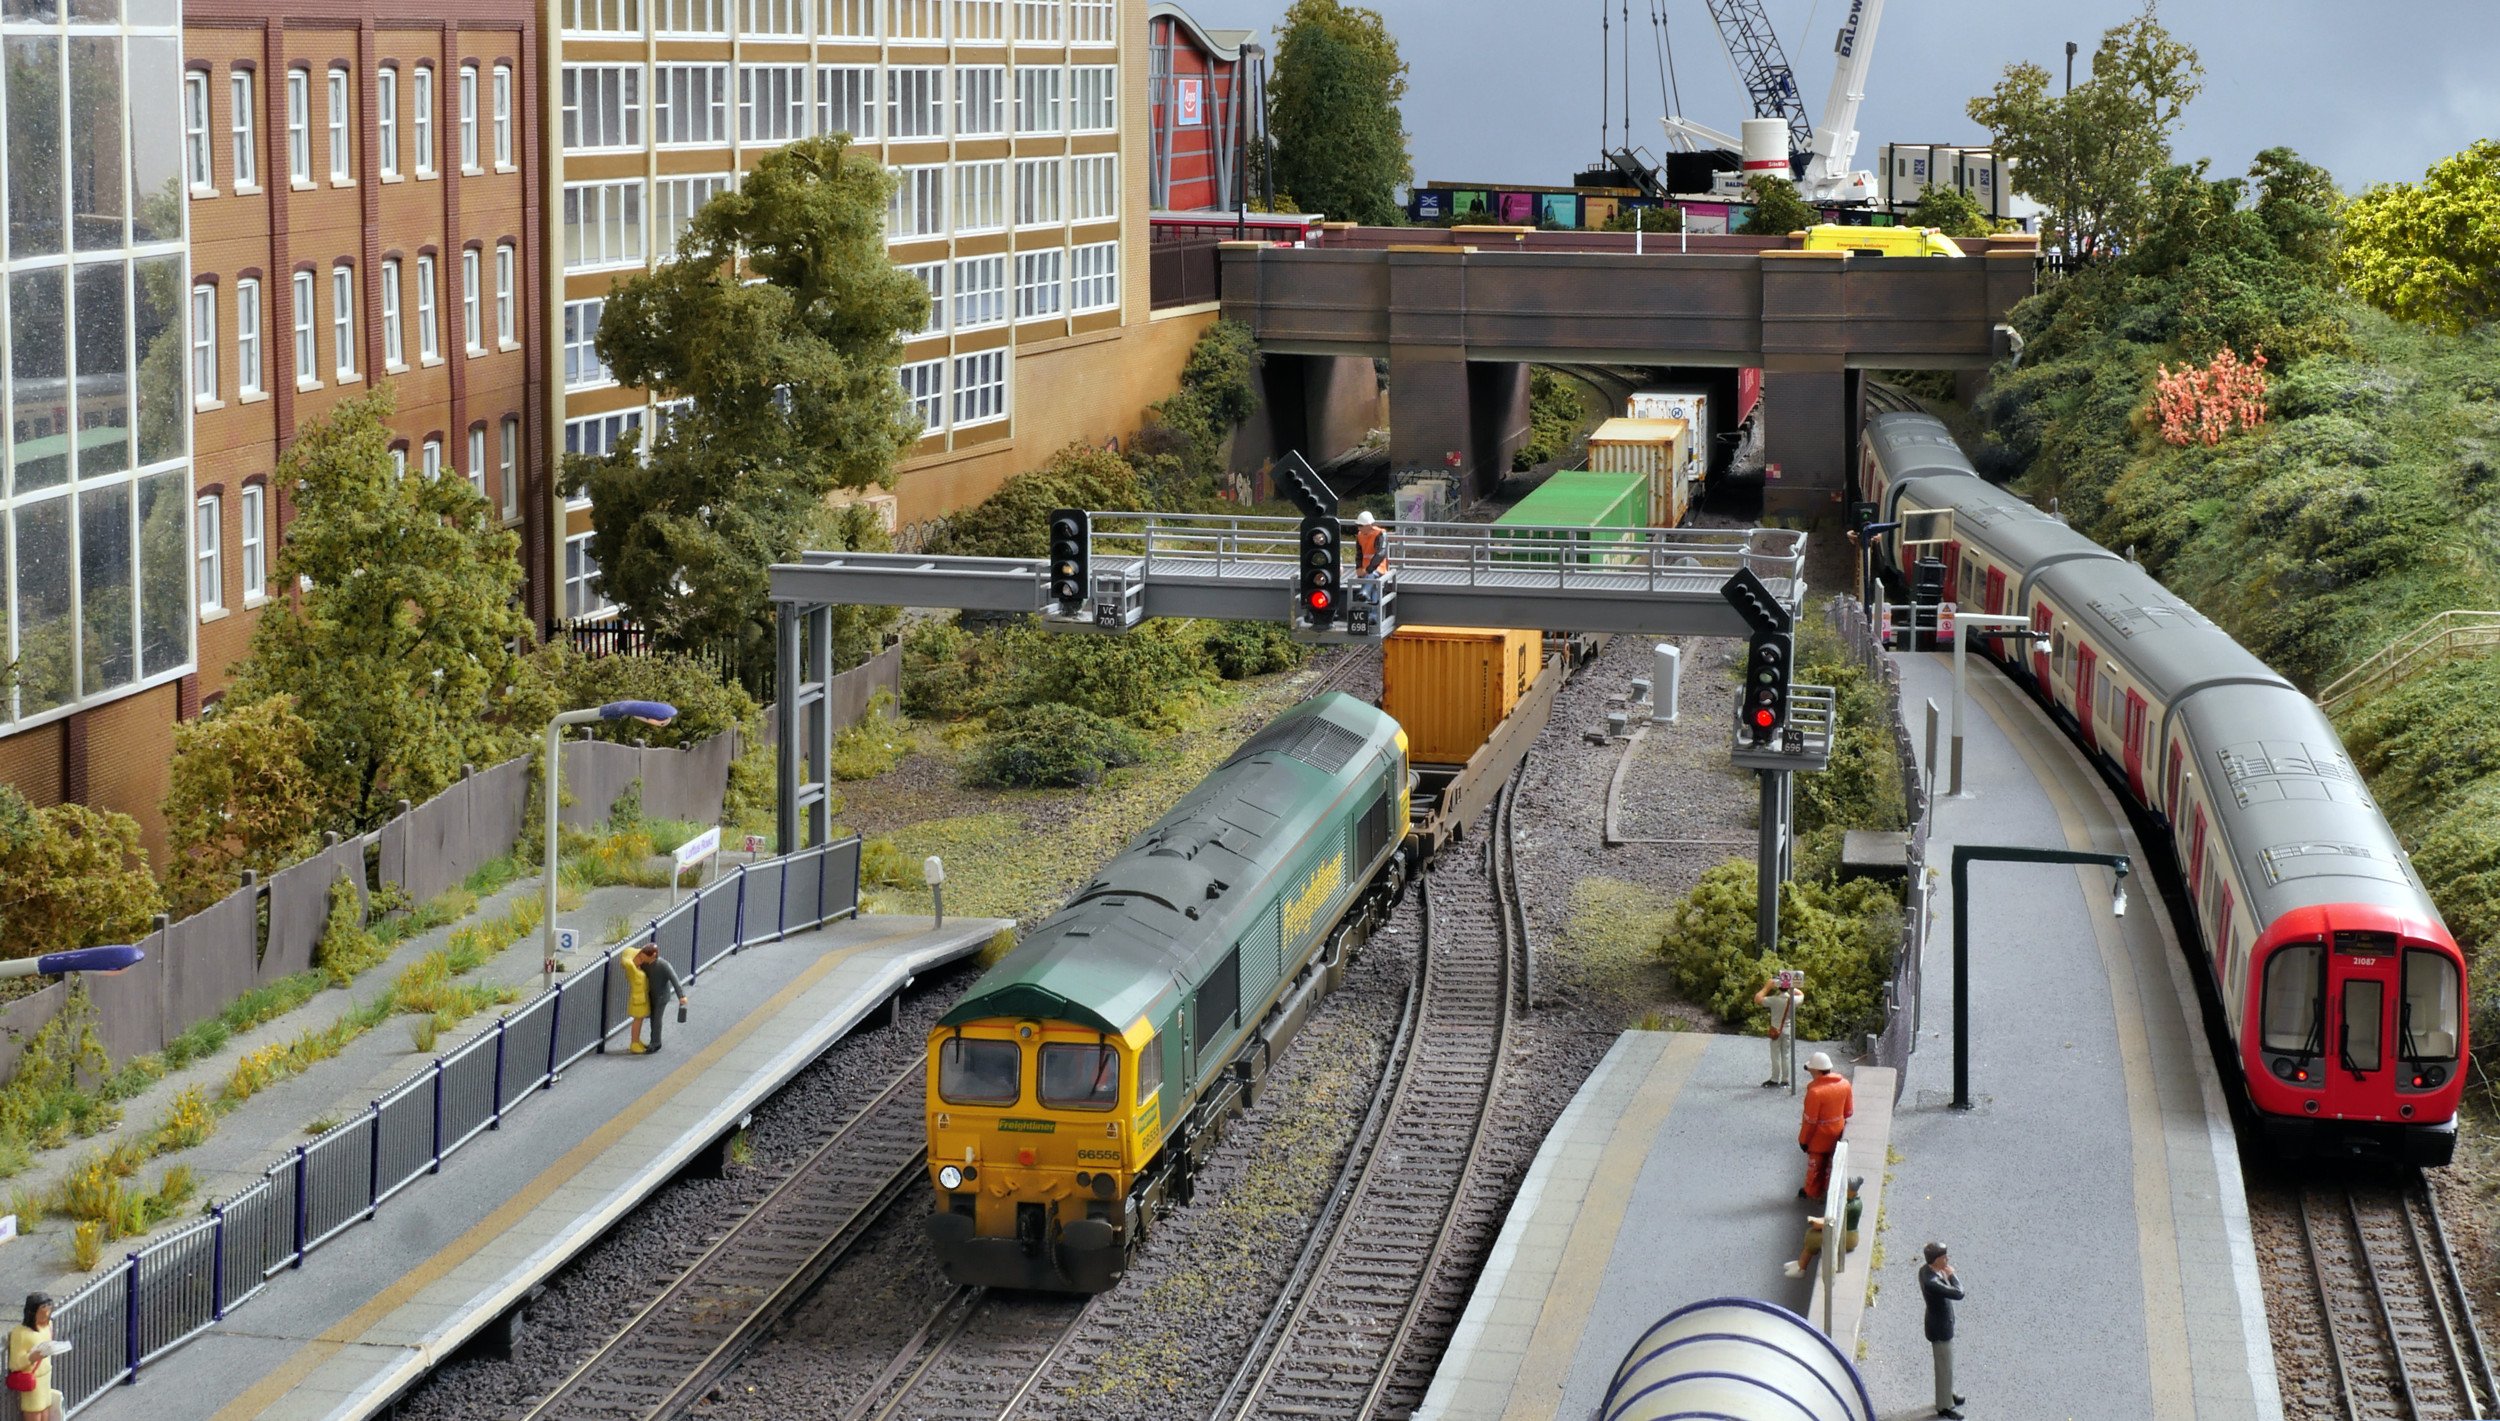 Worthing Model Railway Club’s contemporary ‘OO’ gauge Loftus Road will also be appearing at this year’s Spalding model railway exhibition.